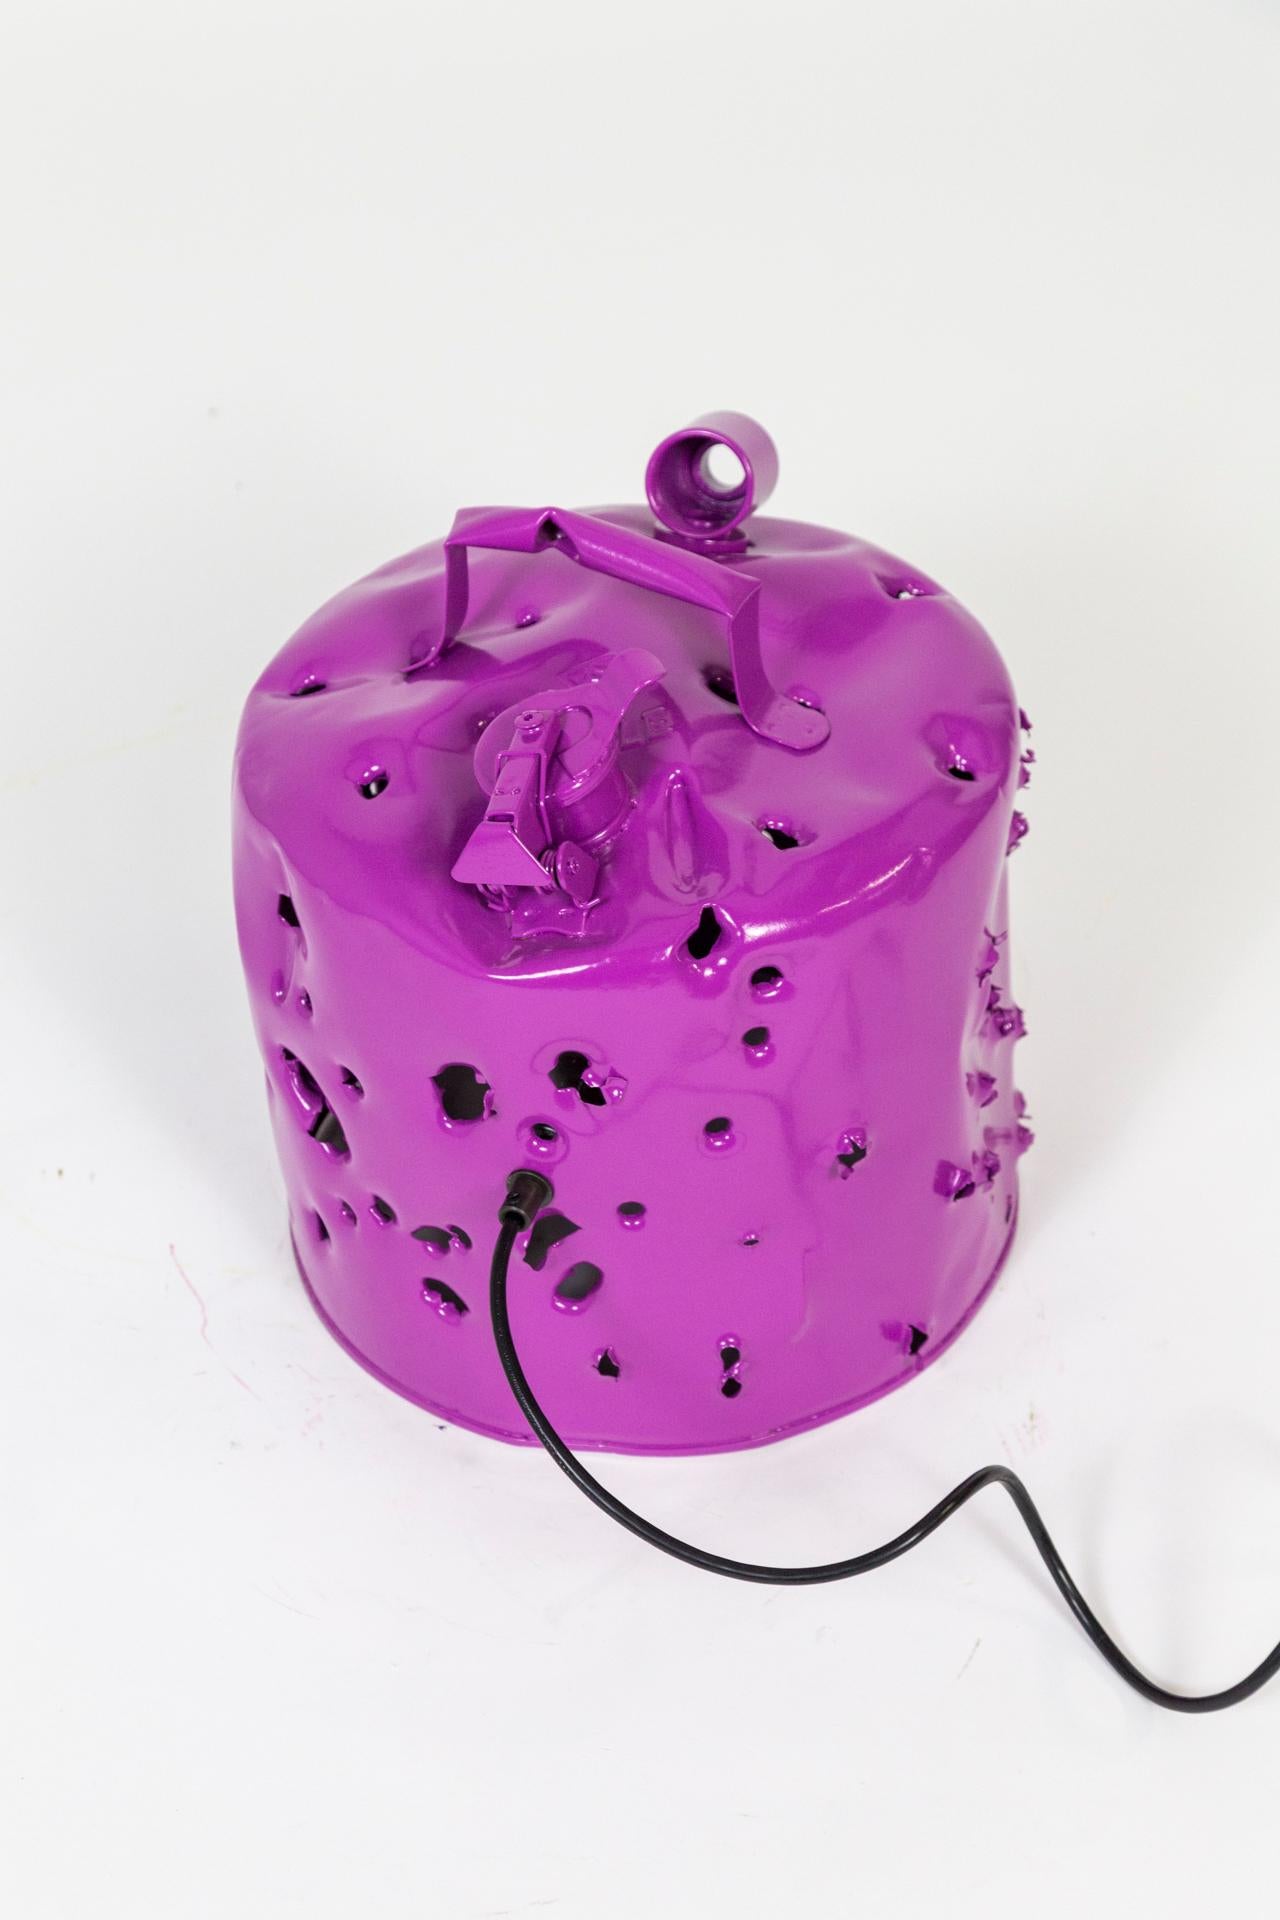 Contemporary Fuchsia Purple Bullet Hole Gas Can Lamp by Charles Linder